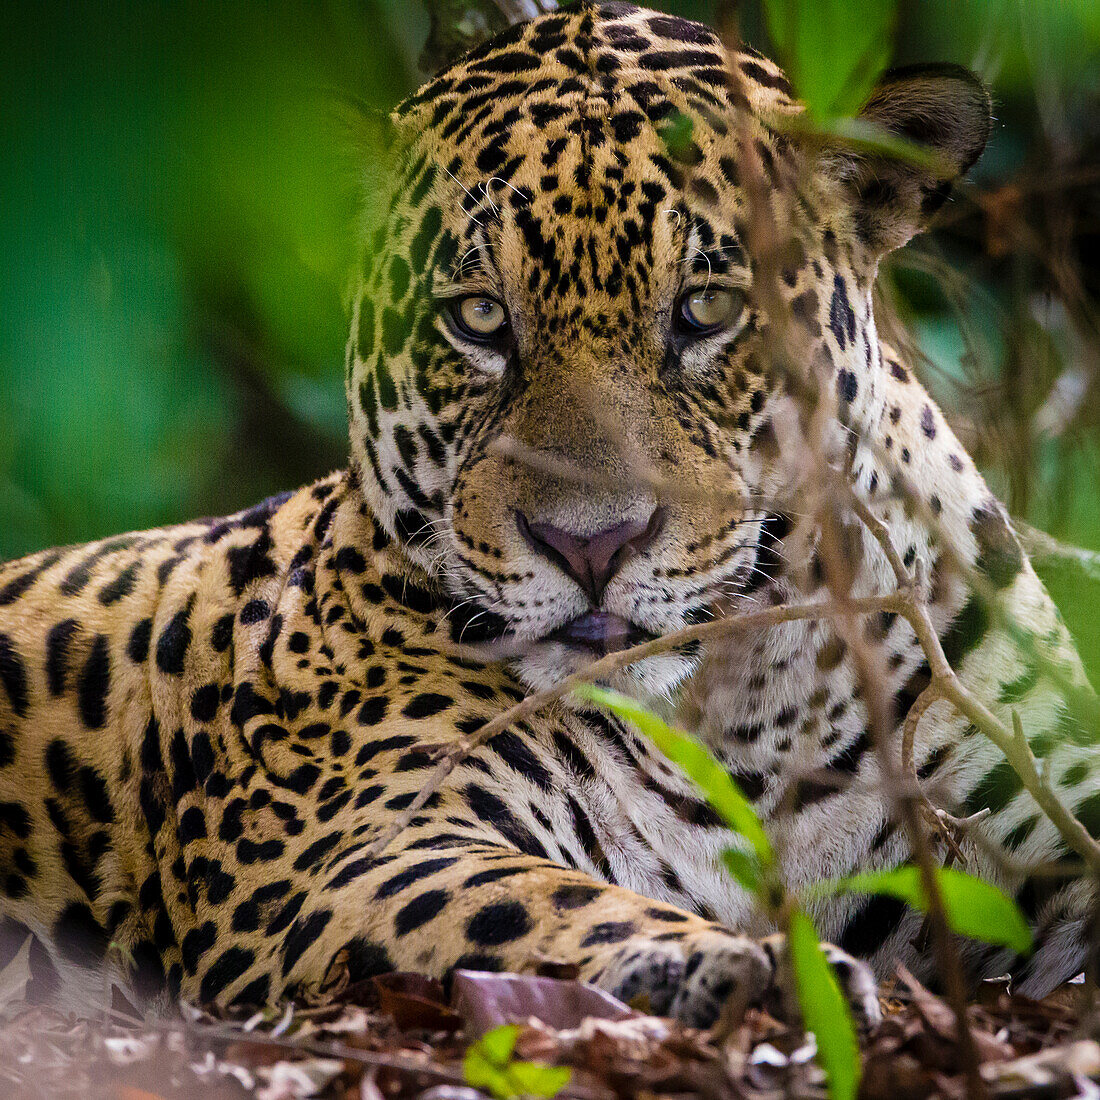 Brazil. A male jaguar (Panthera onca), an apex predator resting along the banks of a river in the Pantanal, the world's largest tropical wetland area, UNESCO World Heritage Site.